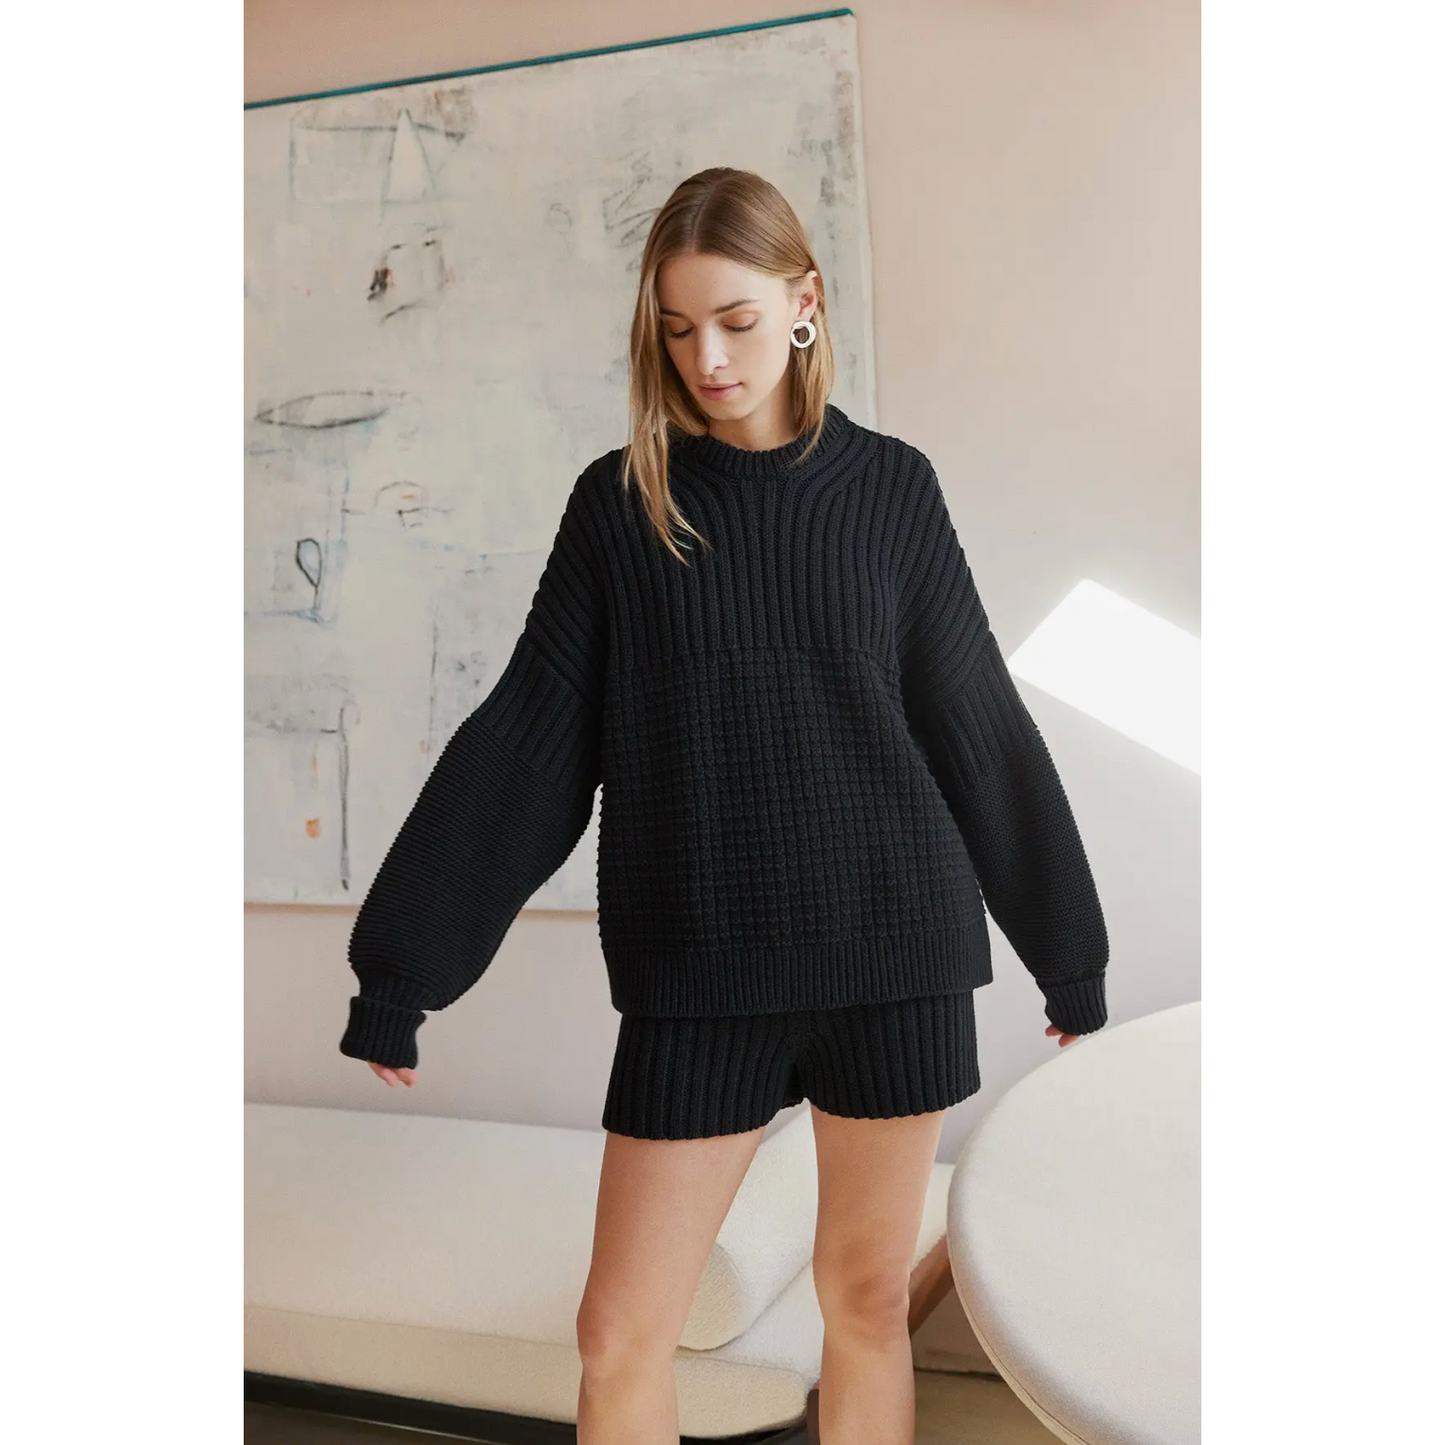 Delcia Sweater- Black - The Knotty Ones - ONE SIZE